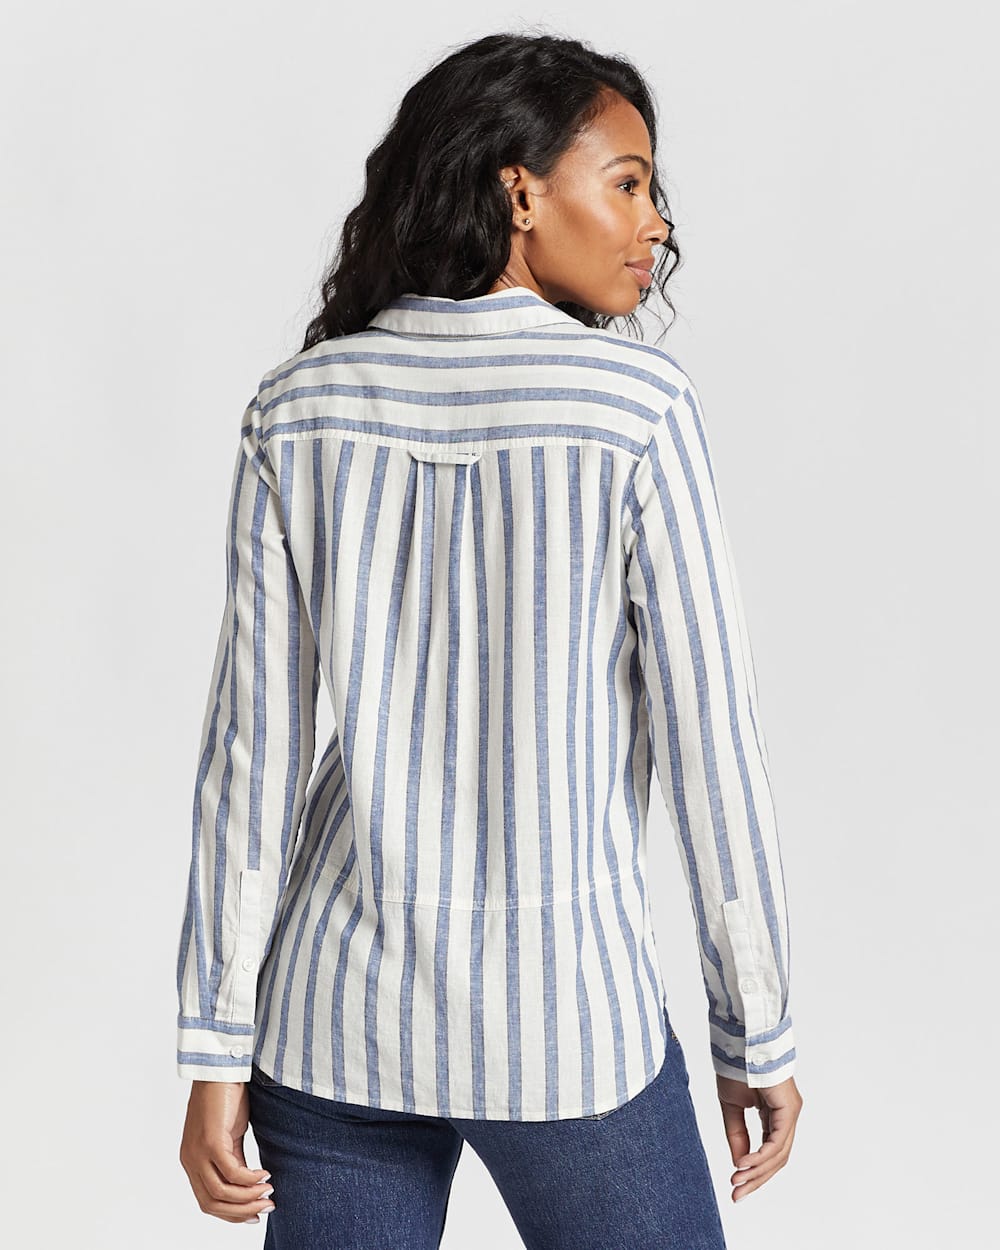 ALTERNATE VIEW OF WOMEN'S LONG-SLEEVE TWO POCKET SHIRT IN BLUE STRIPE image number 3